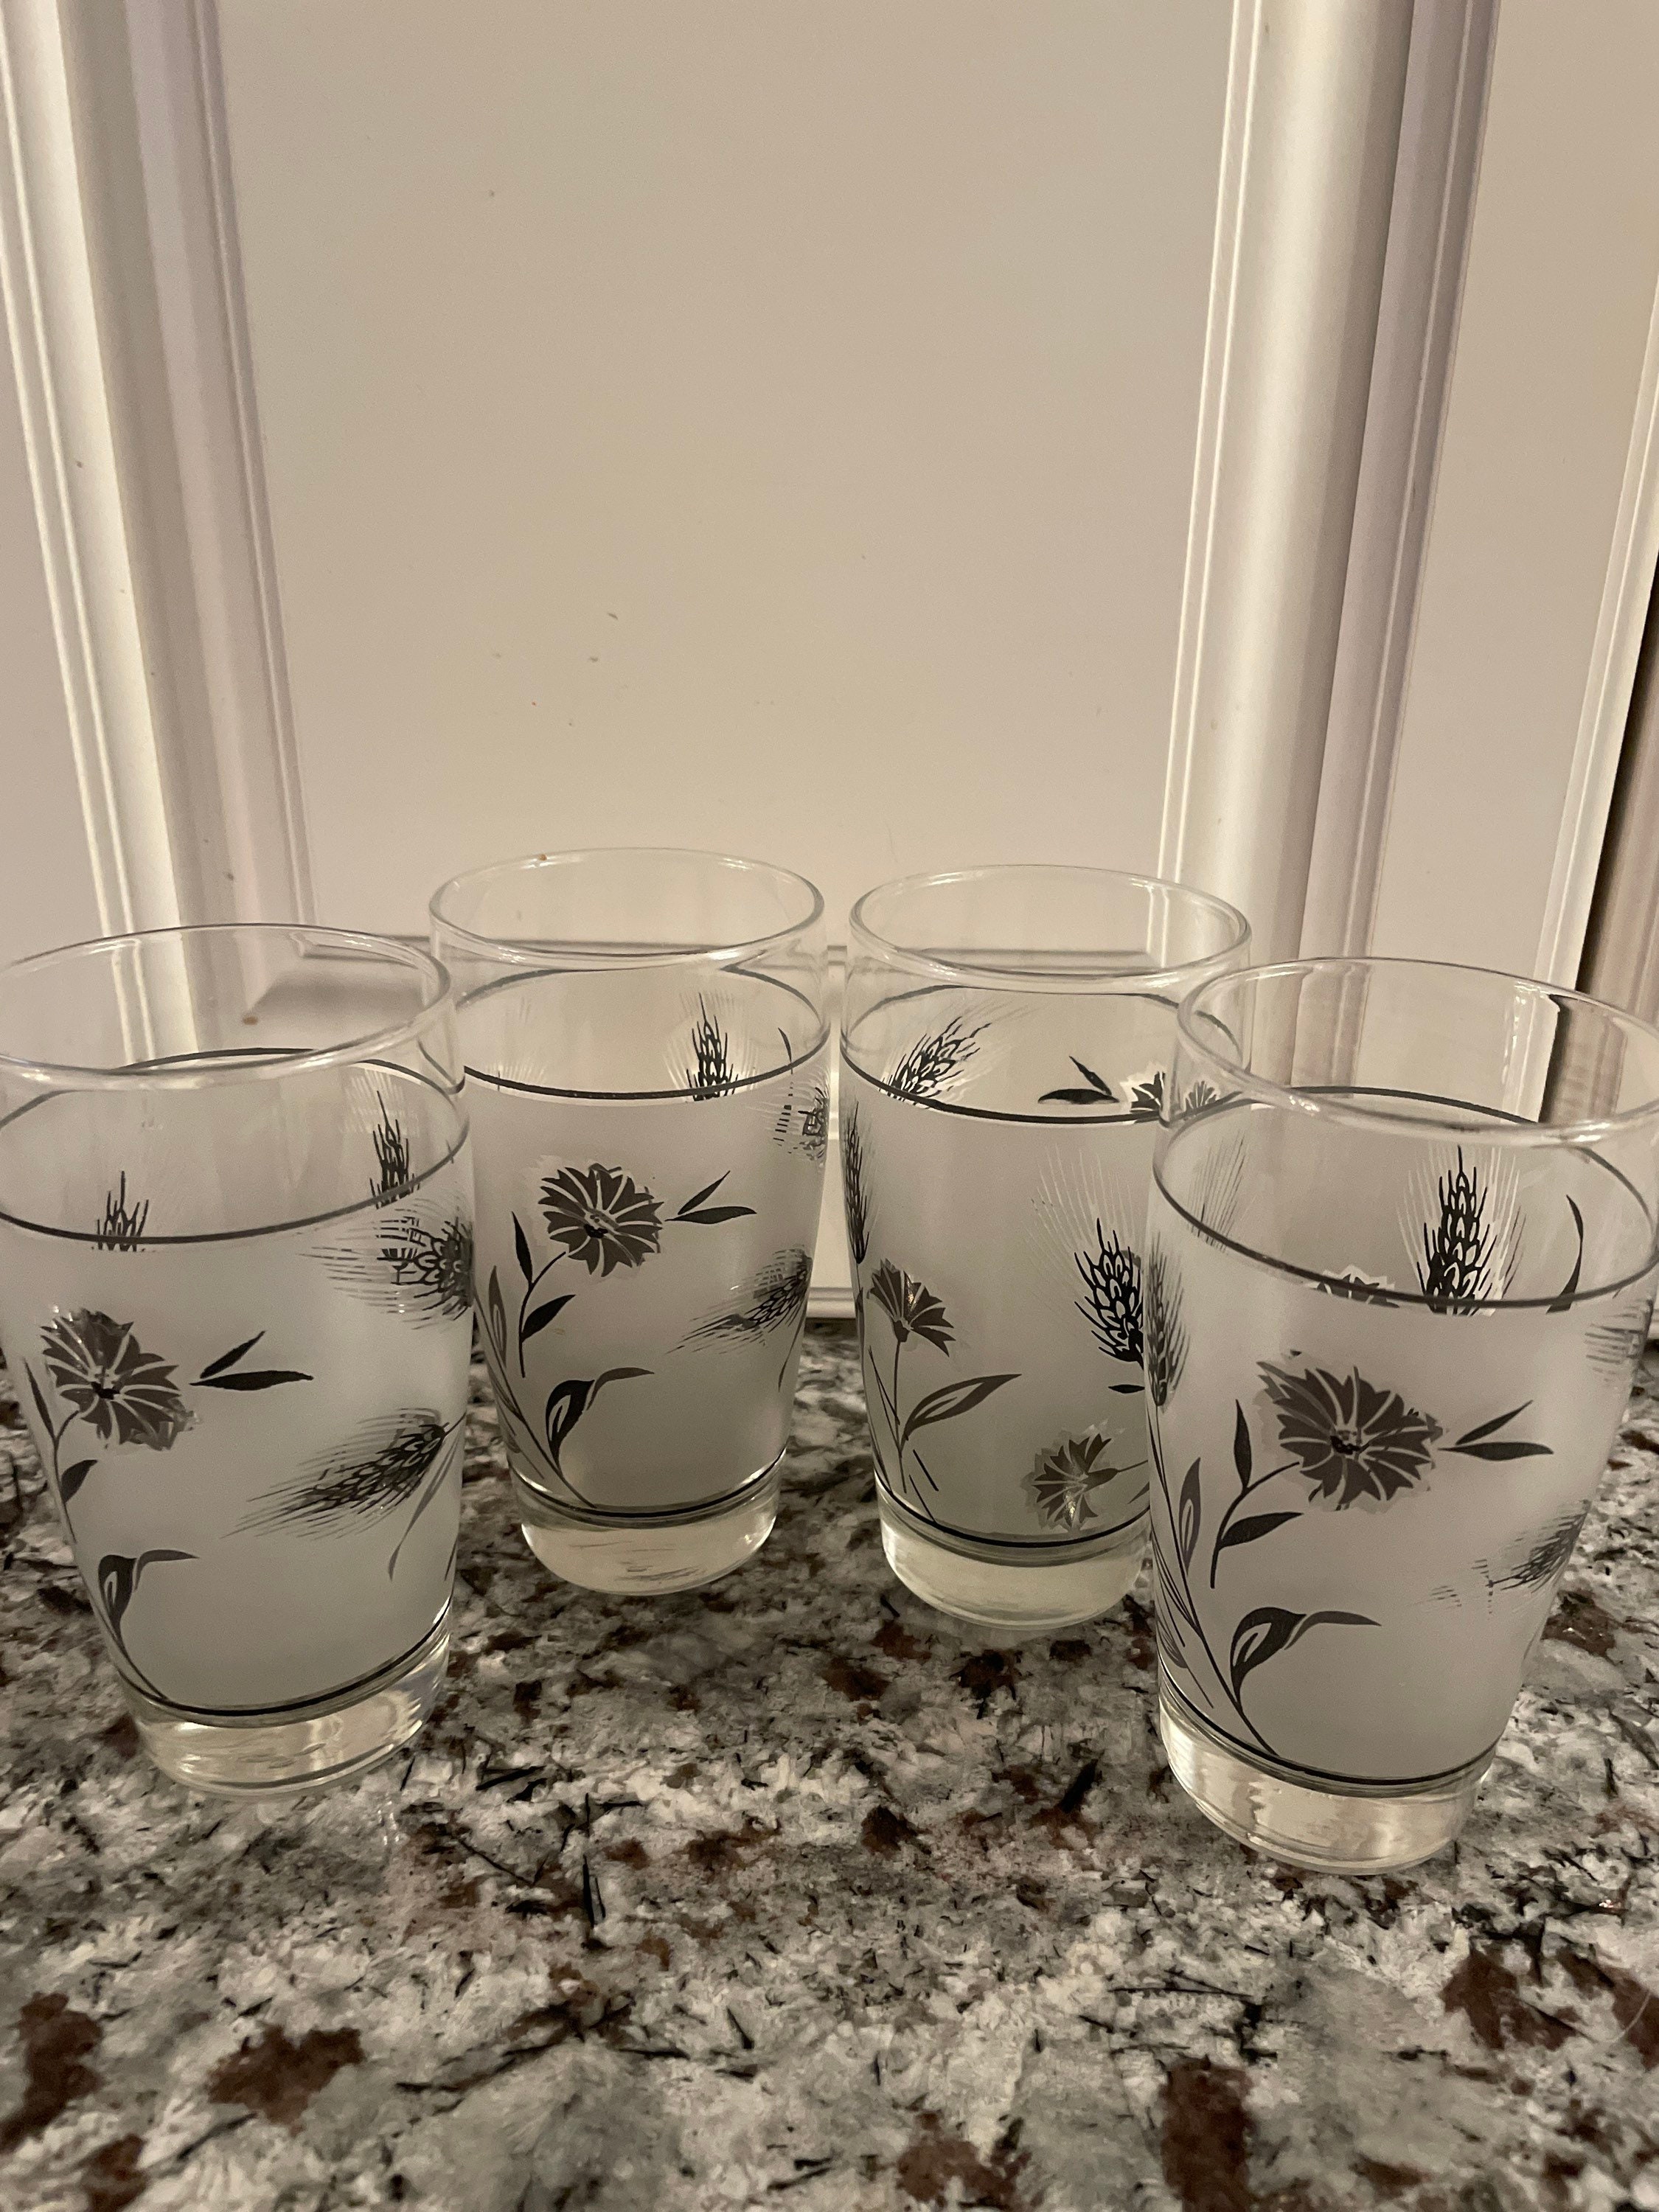 Vintage Libby Dots Glasses. Set of 4 Glasses. 16 Ounce Capacity 